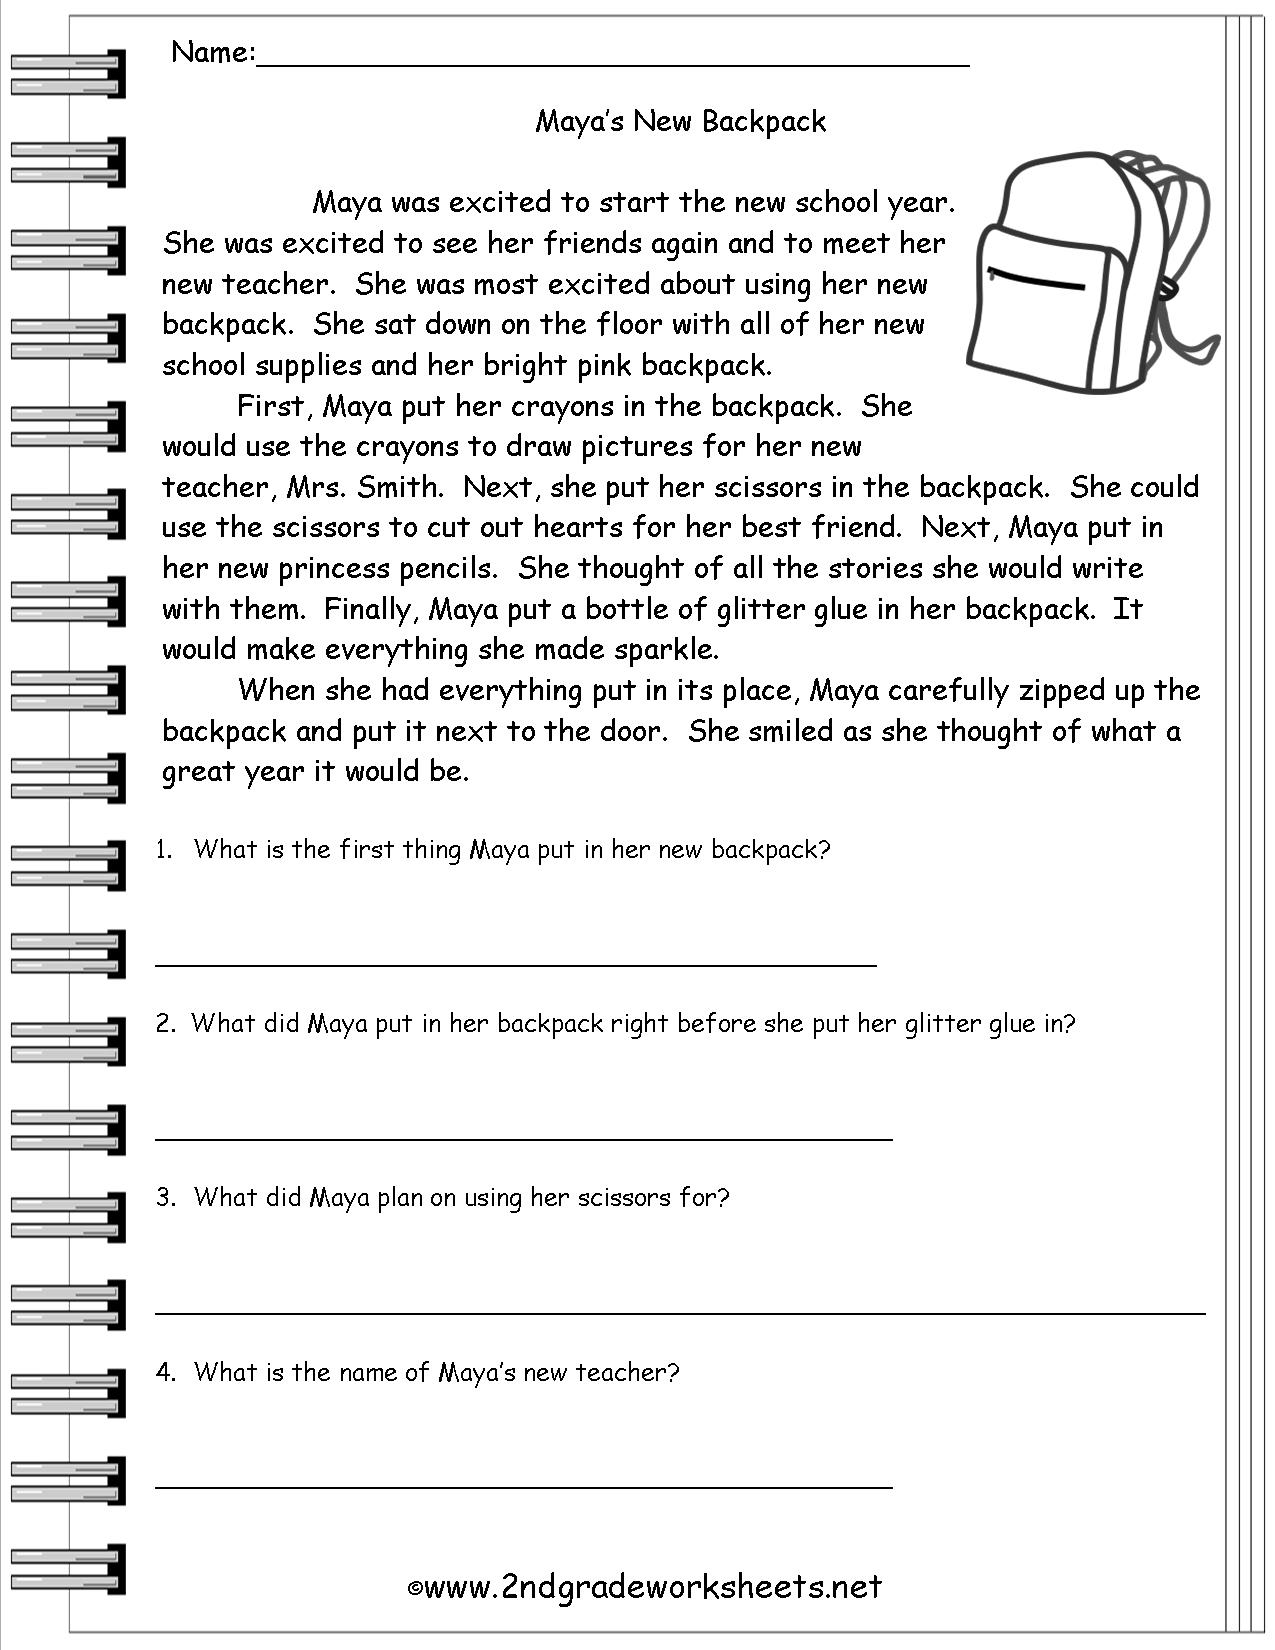 14 Images of Reading With Questions Worksheets